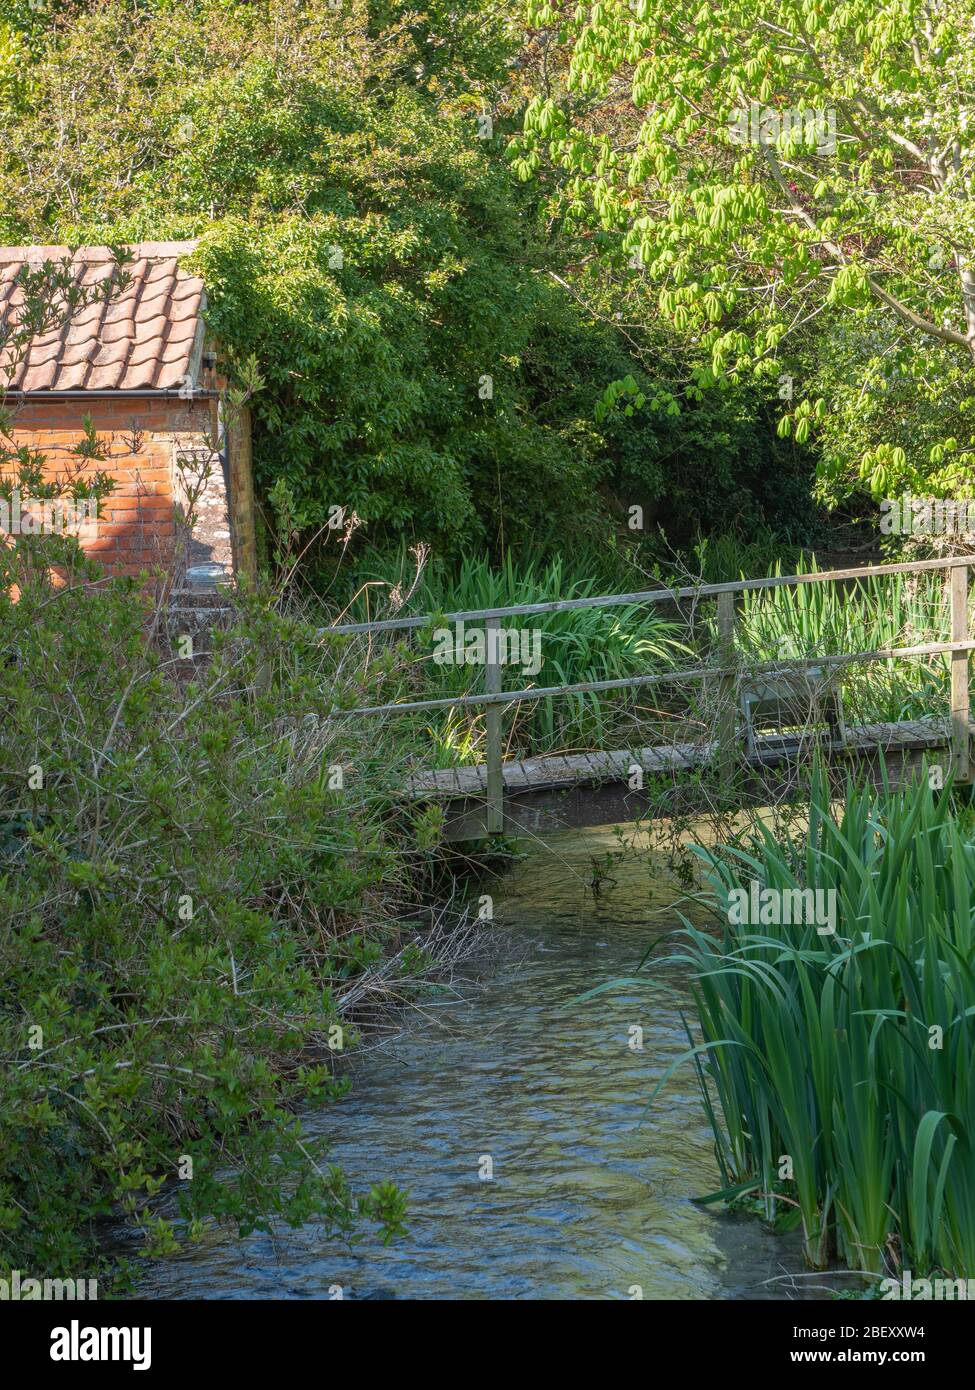 A pastoral scene with small stream, old foot bridge, rushes, trees and a brick built outbuilding in Westbury Leigh, Westbury, Wiltshire, UK. Stock Photo